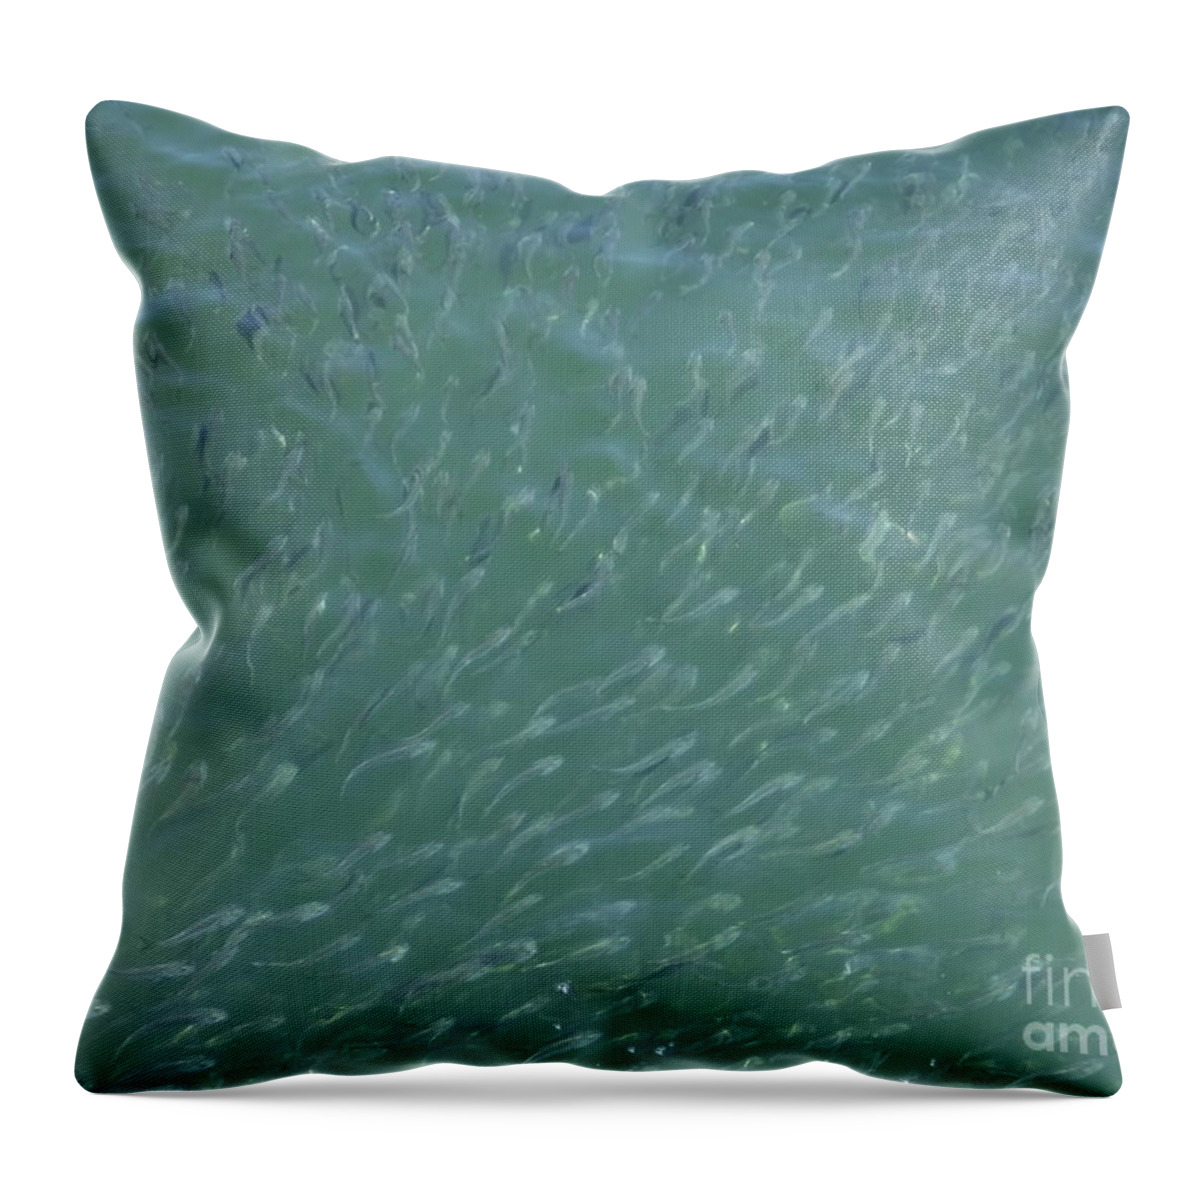 School Of Minnows Throw Pillow featuring the photograph School Of Minnows by Barbra Telfer